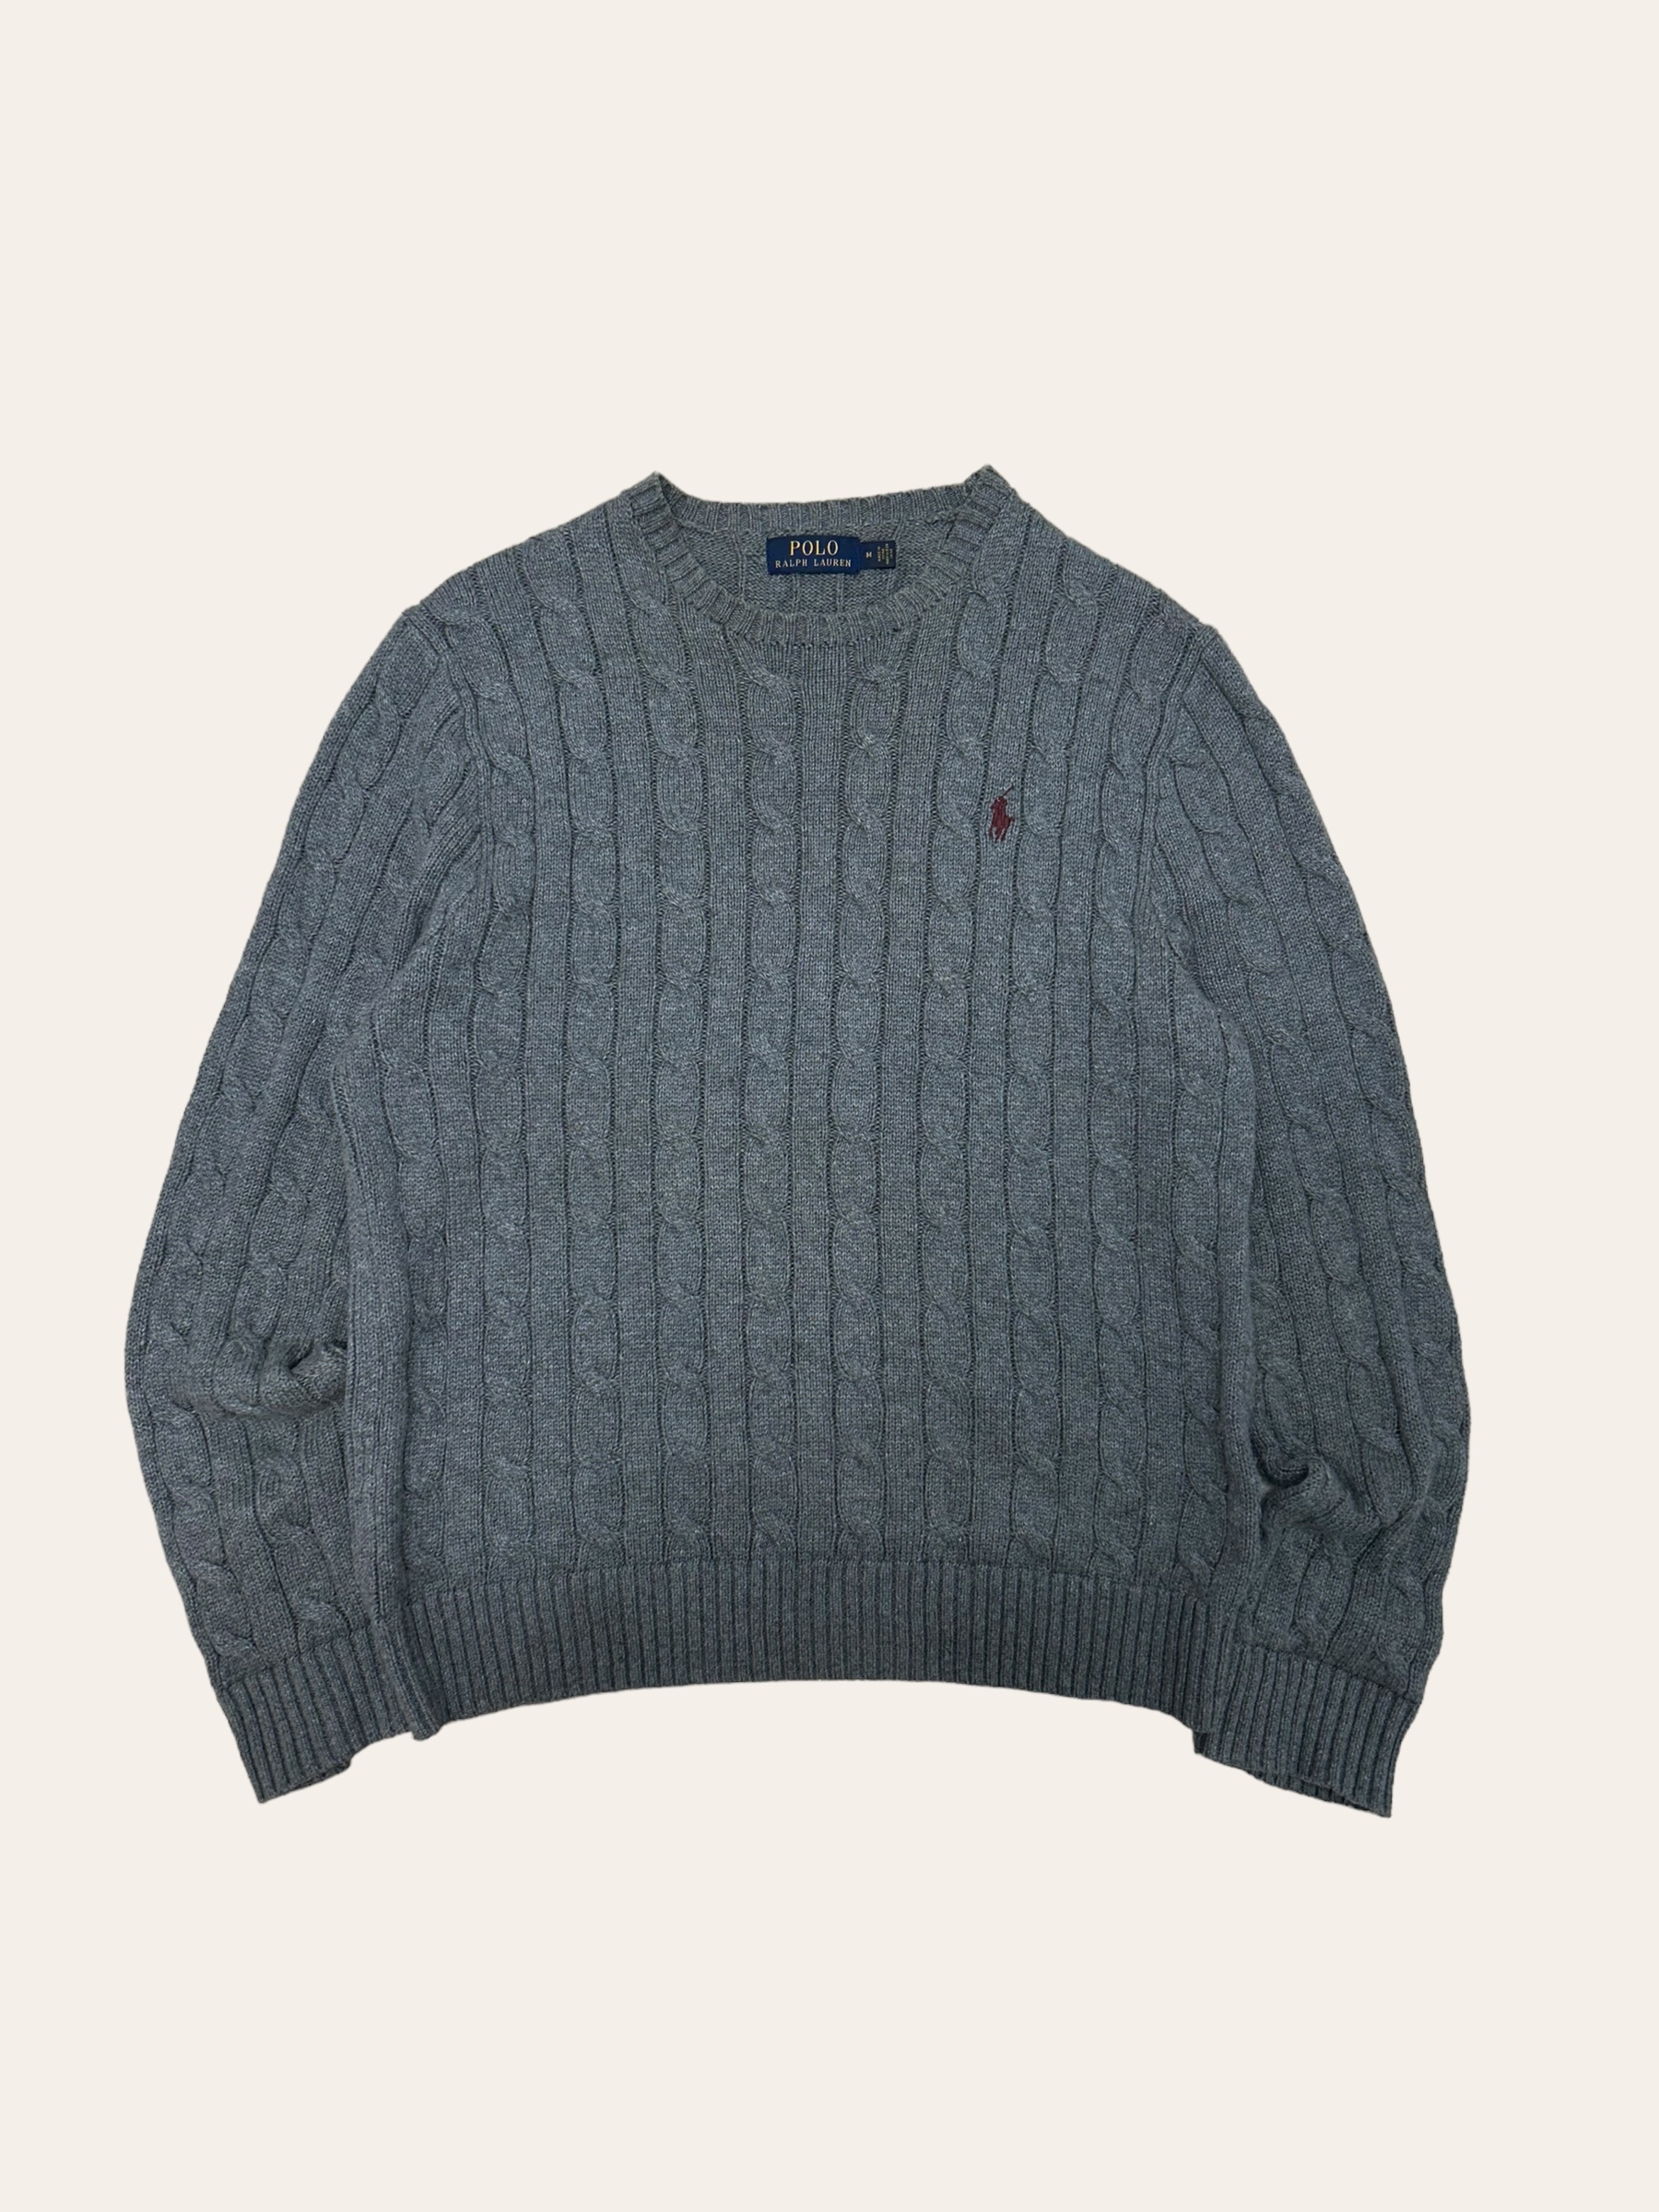 Polo ralph lauren gray cable cotton sweater M